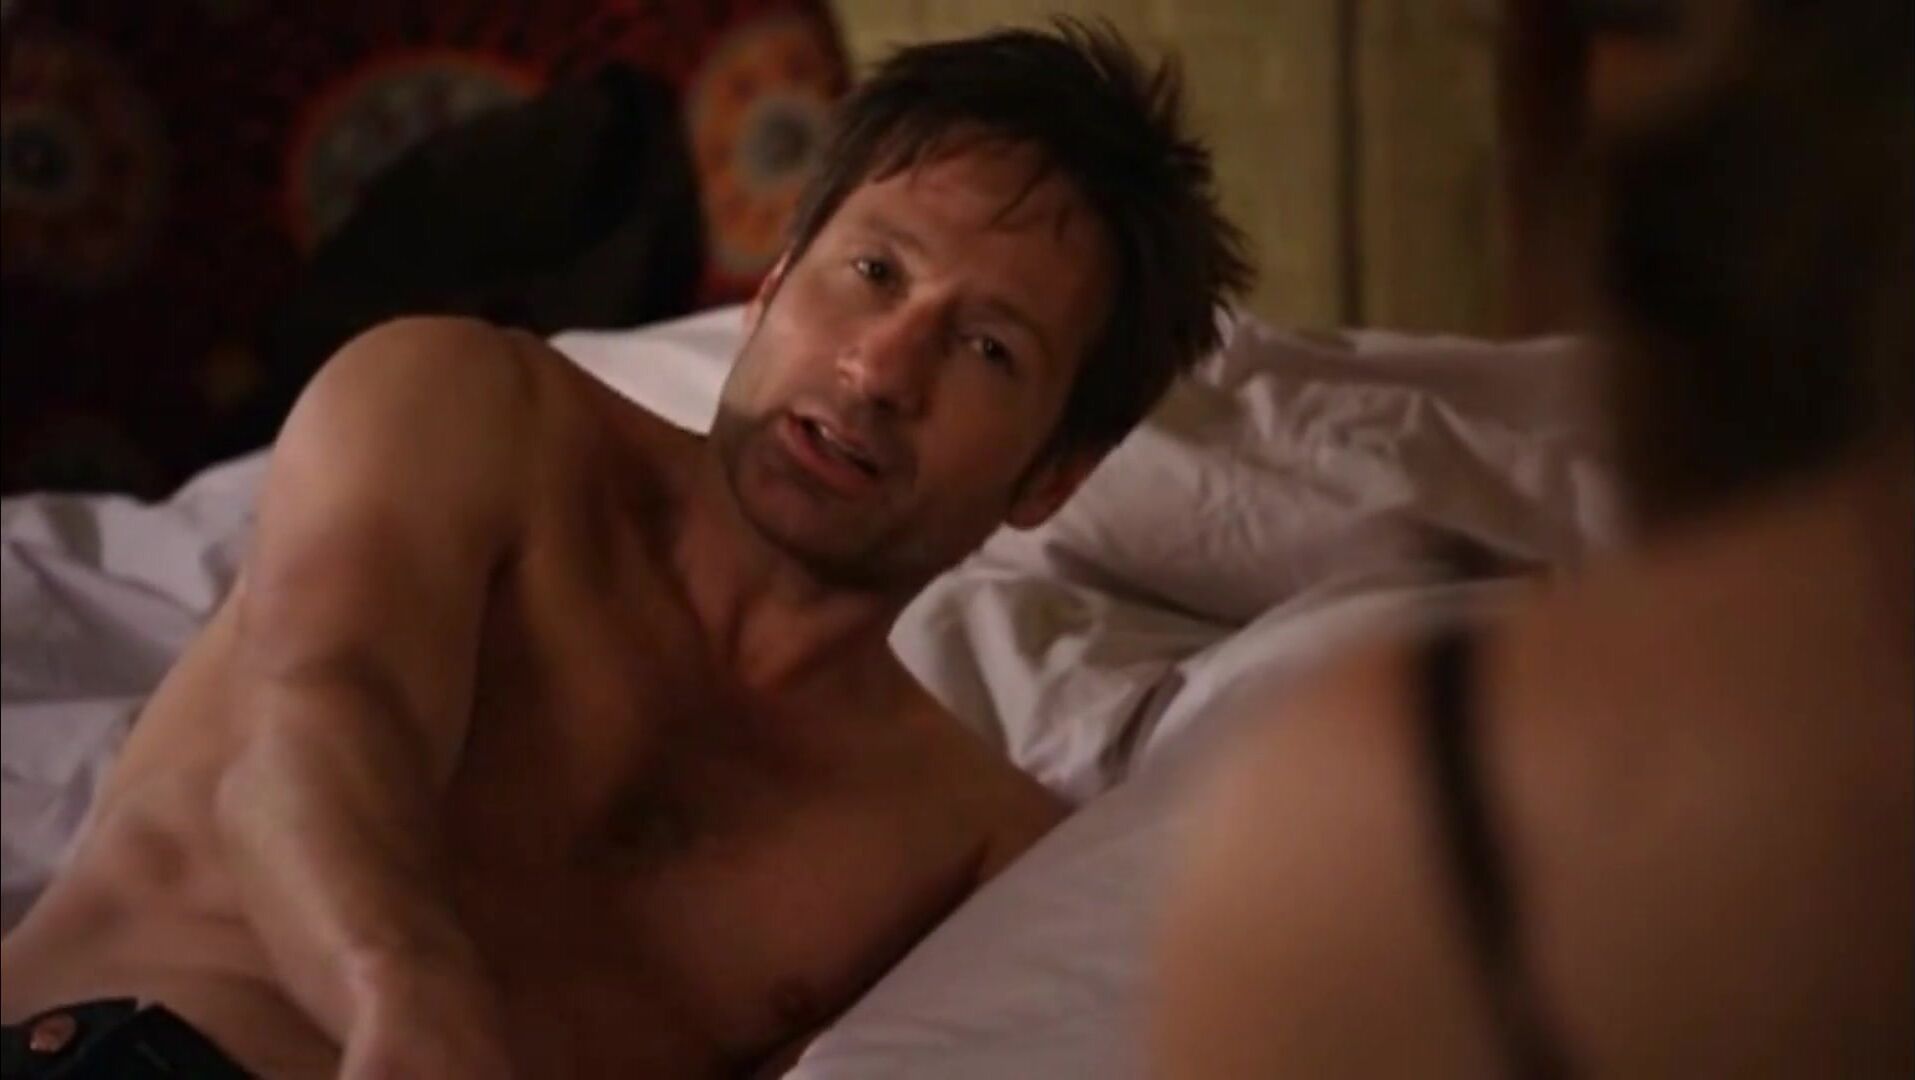 Anus David Duchovny and other men have sex with MILFs in the TV series Californication MetArt - 1